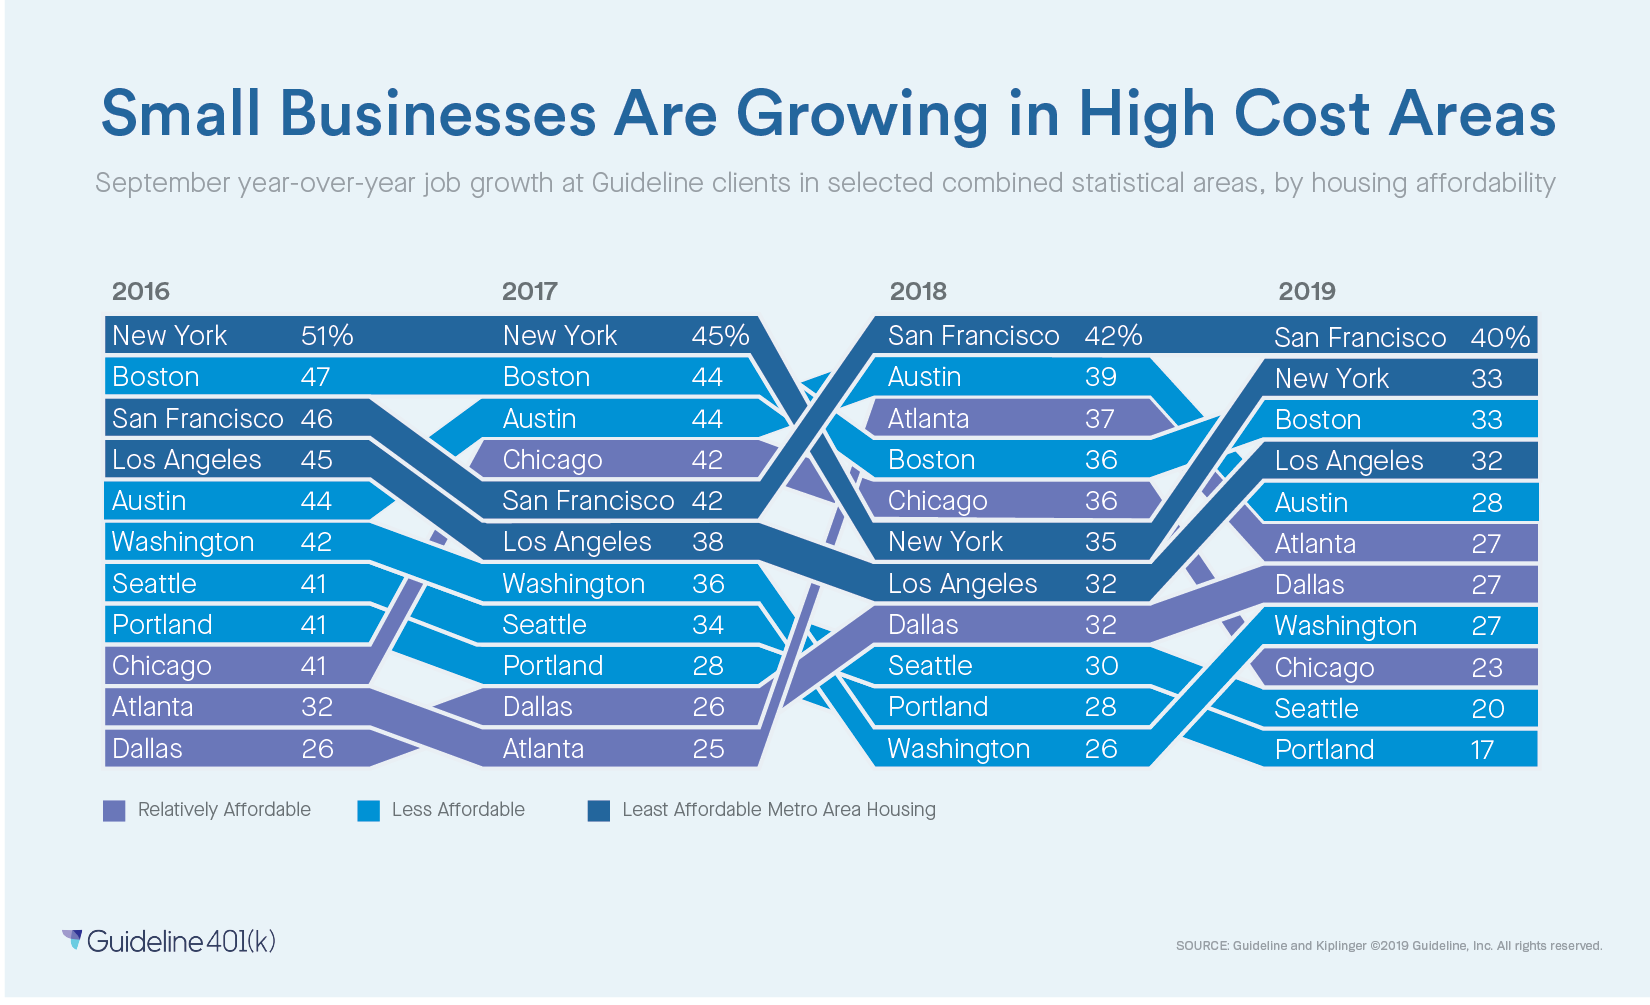 Small Businesses are growing in high cost areas